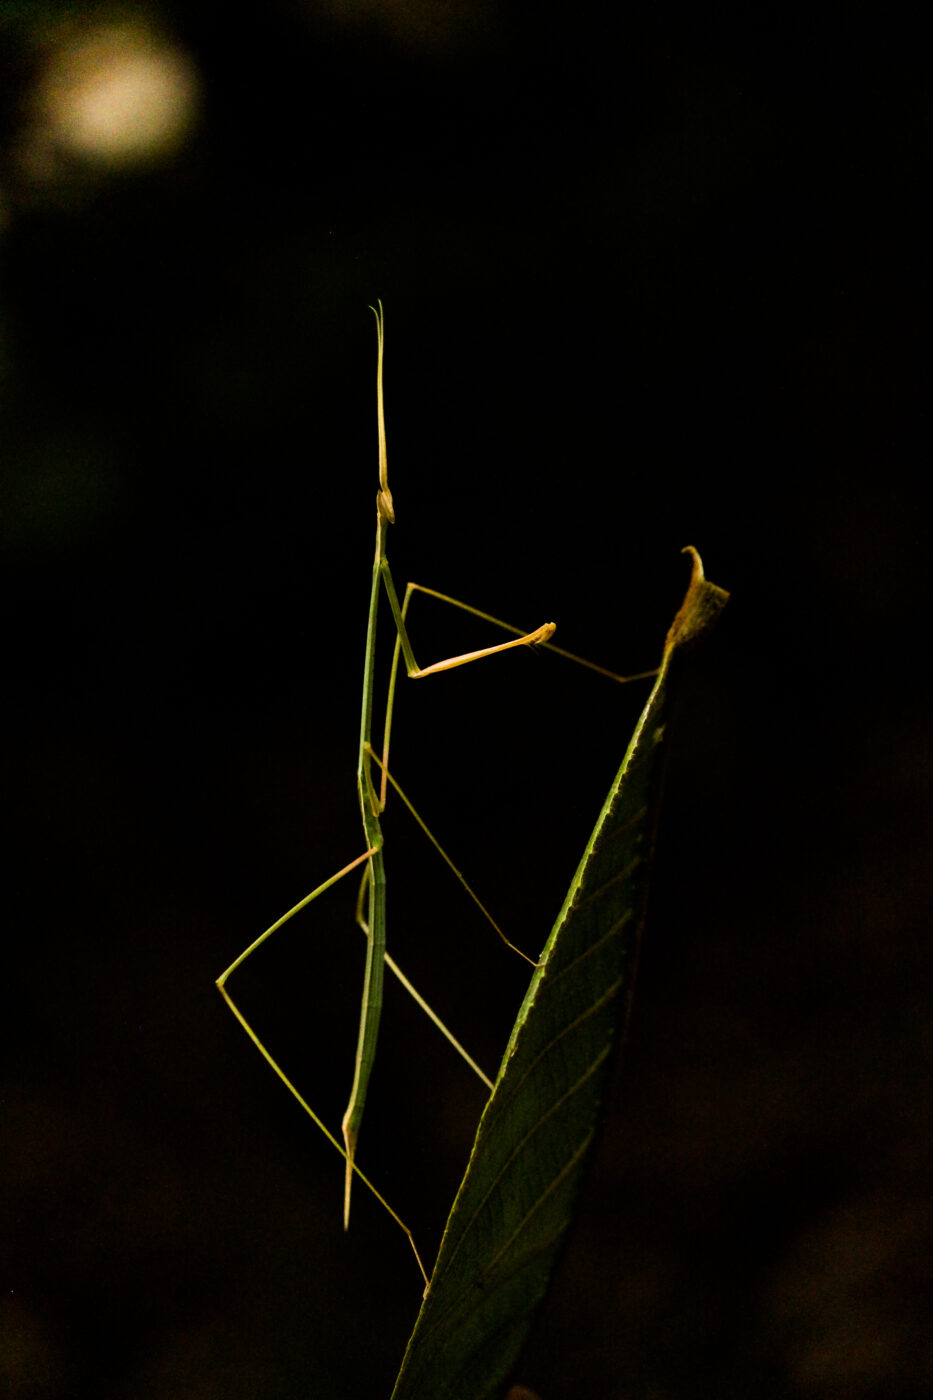 A stick mantis is on leaf. The shades of the matis and the leaf are almost the same and without the movement of the insect it would be impossible to locate it. The body of the mantis was aligned with the veins of the leaf which made it harder to identify.